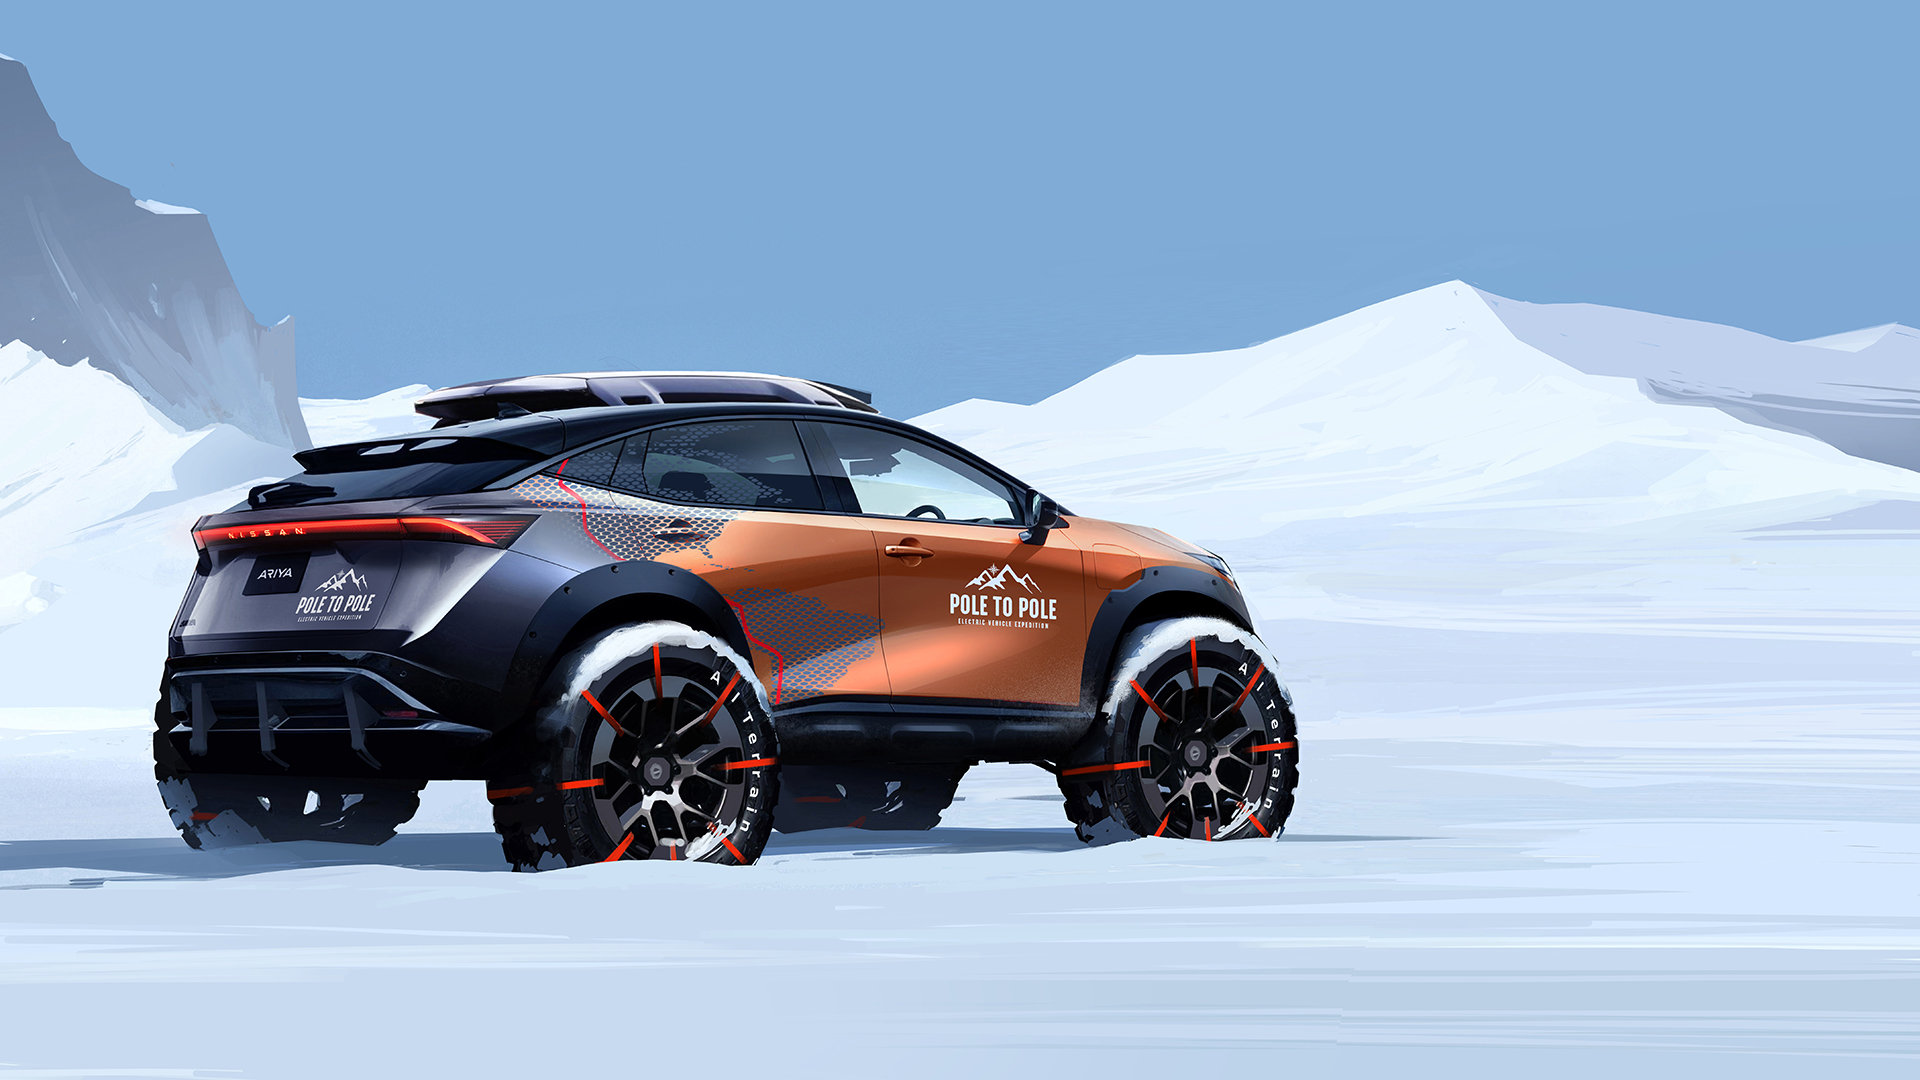 Nissan announced its partnership with British adventurer, Chris Ramsey, to undertake the world’s-first all-electric driving adventure from the magnetic North Pole to the South Pole. / Nissan